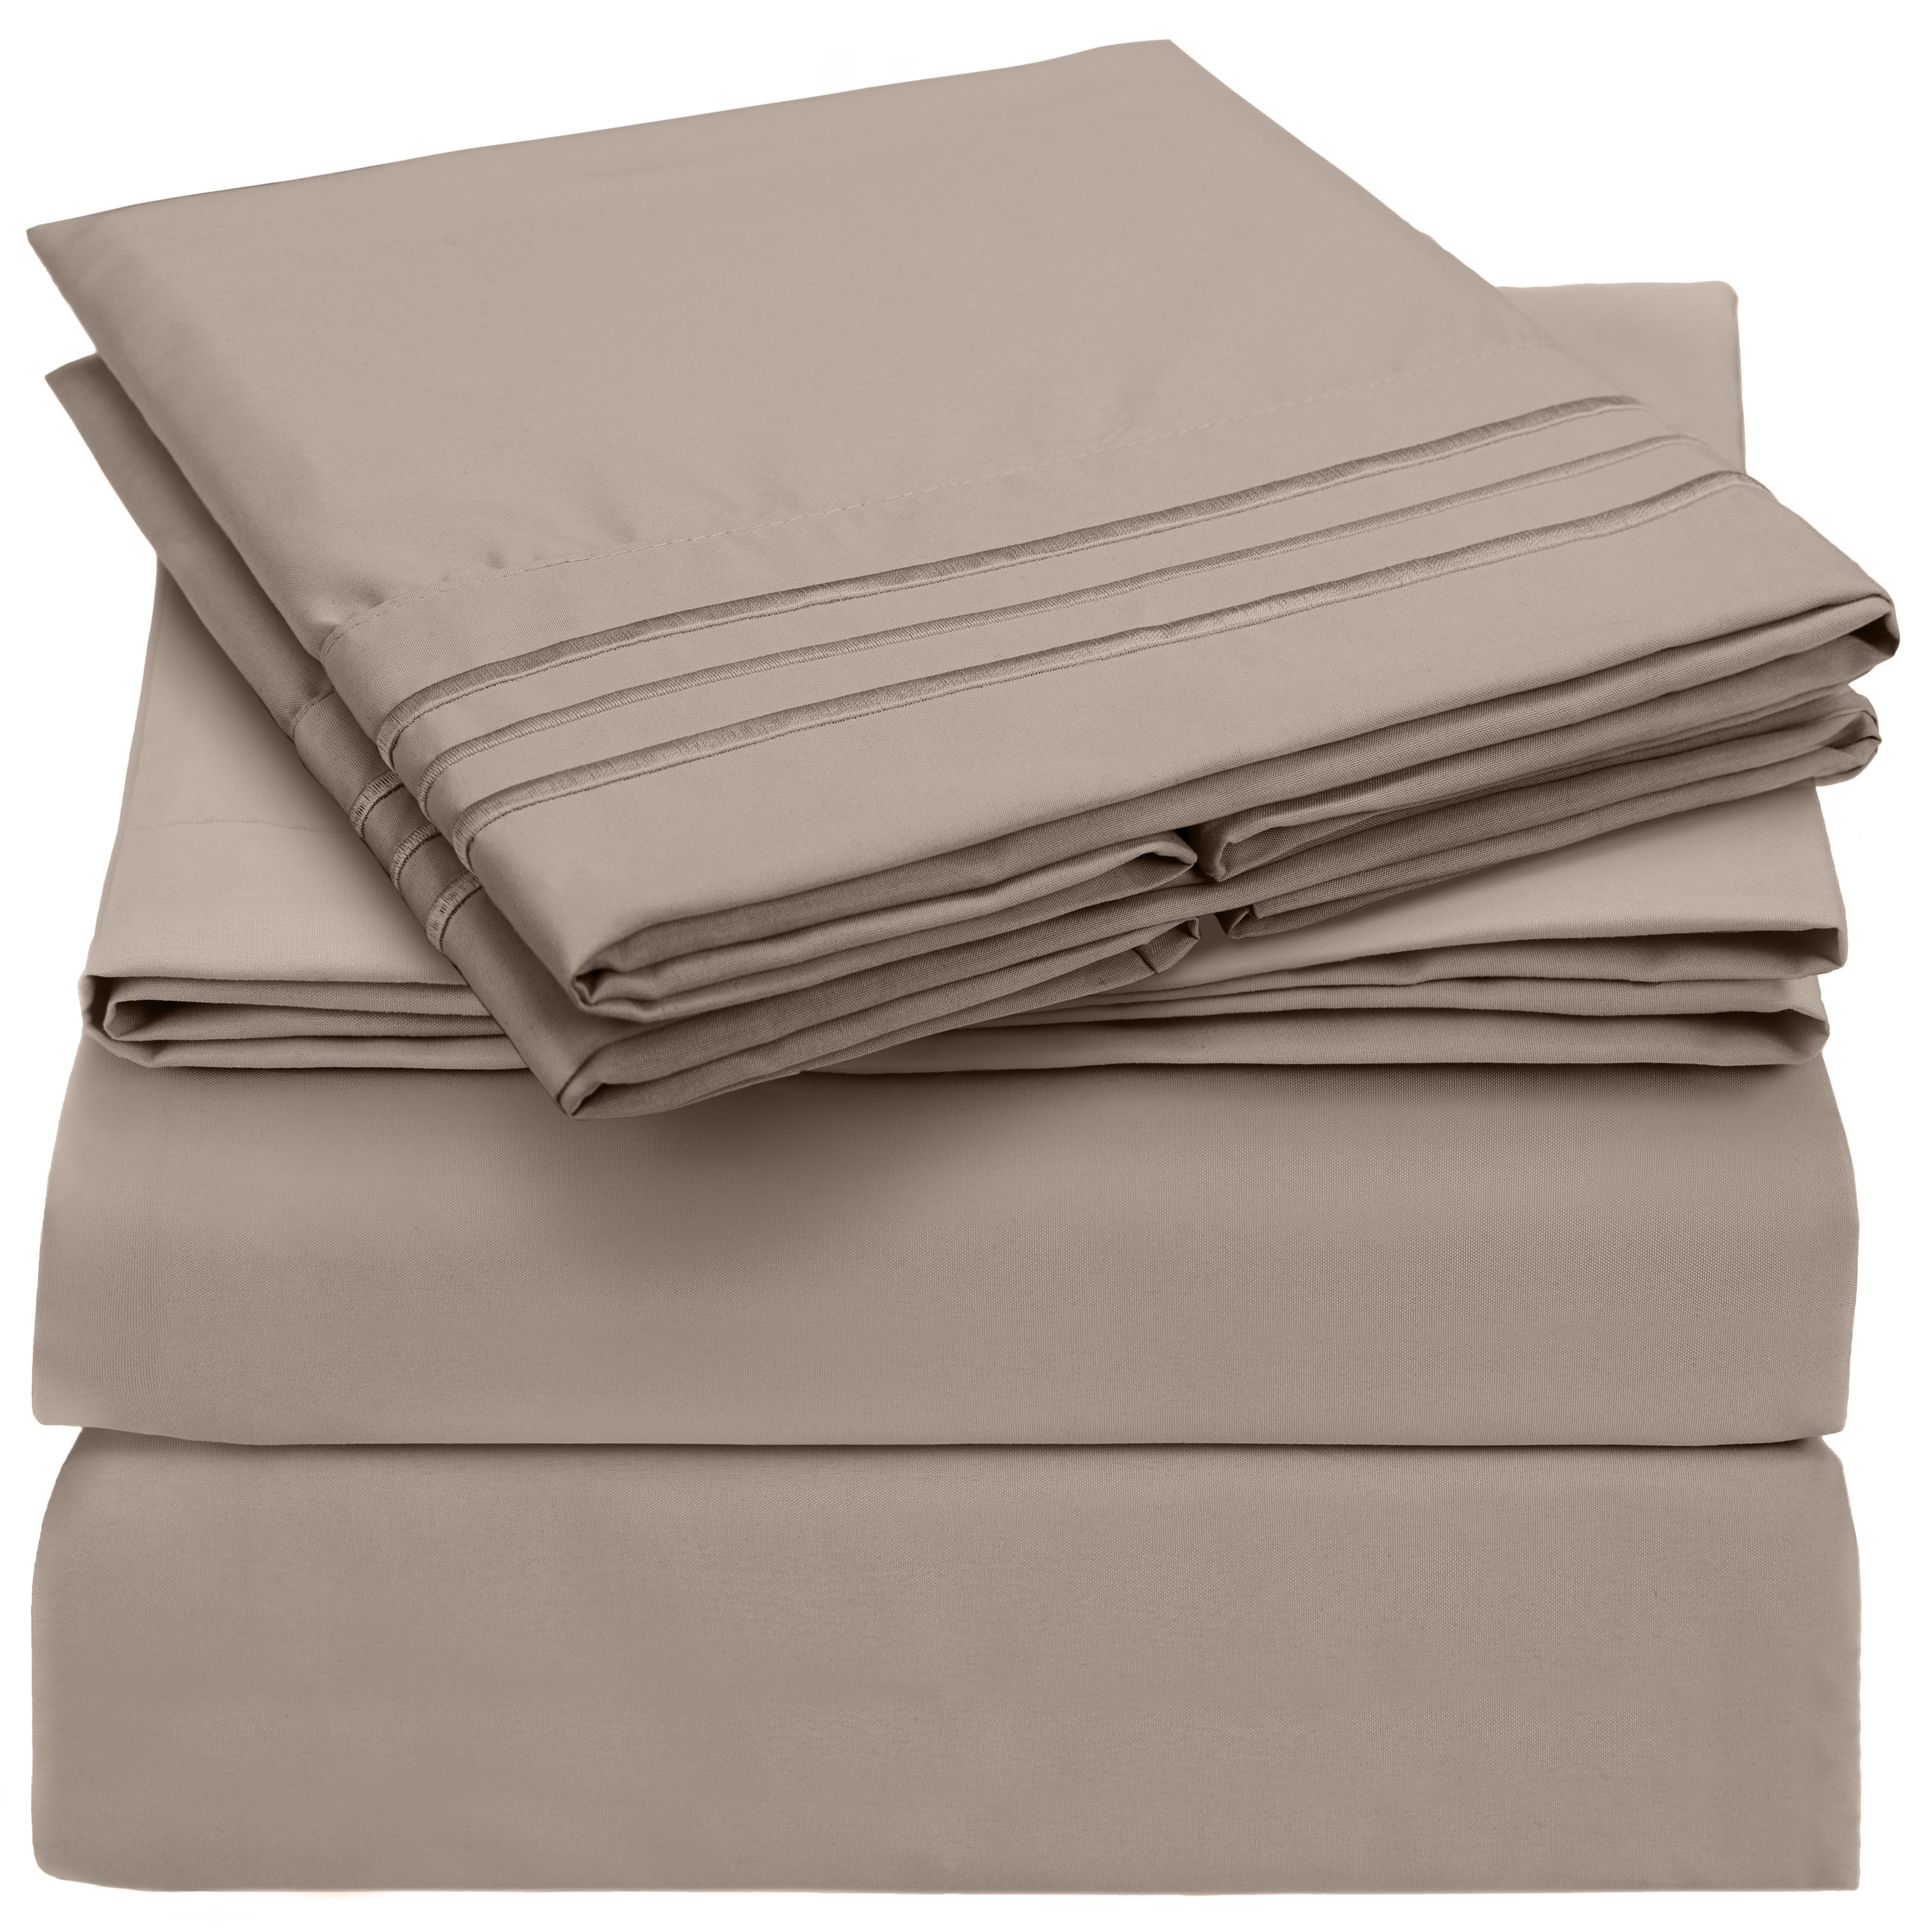 Mellanni Queen Sheet Set - Hotel Luxury Bedding, Ultra Soft and Cooling  Sheets, Extra Deep 21 Pocke…See more Mellanni Queen Sheet Set - Hotel  Luxury